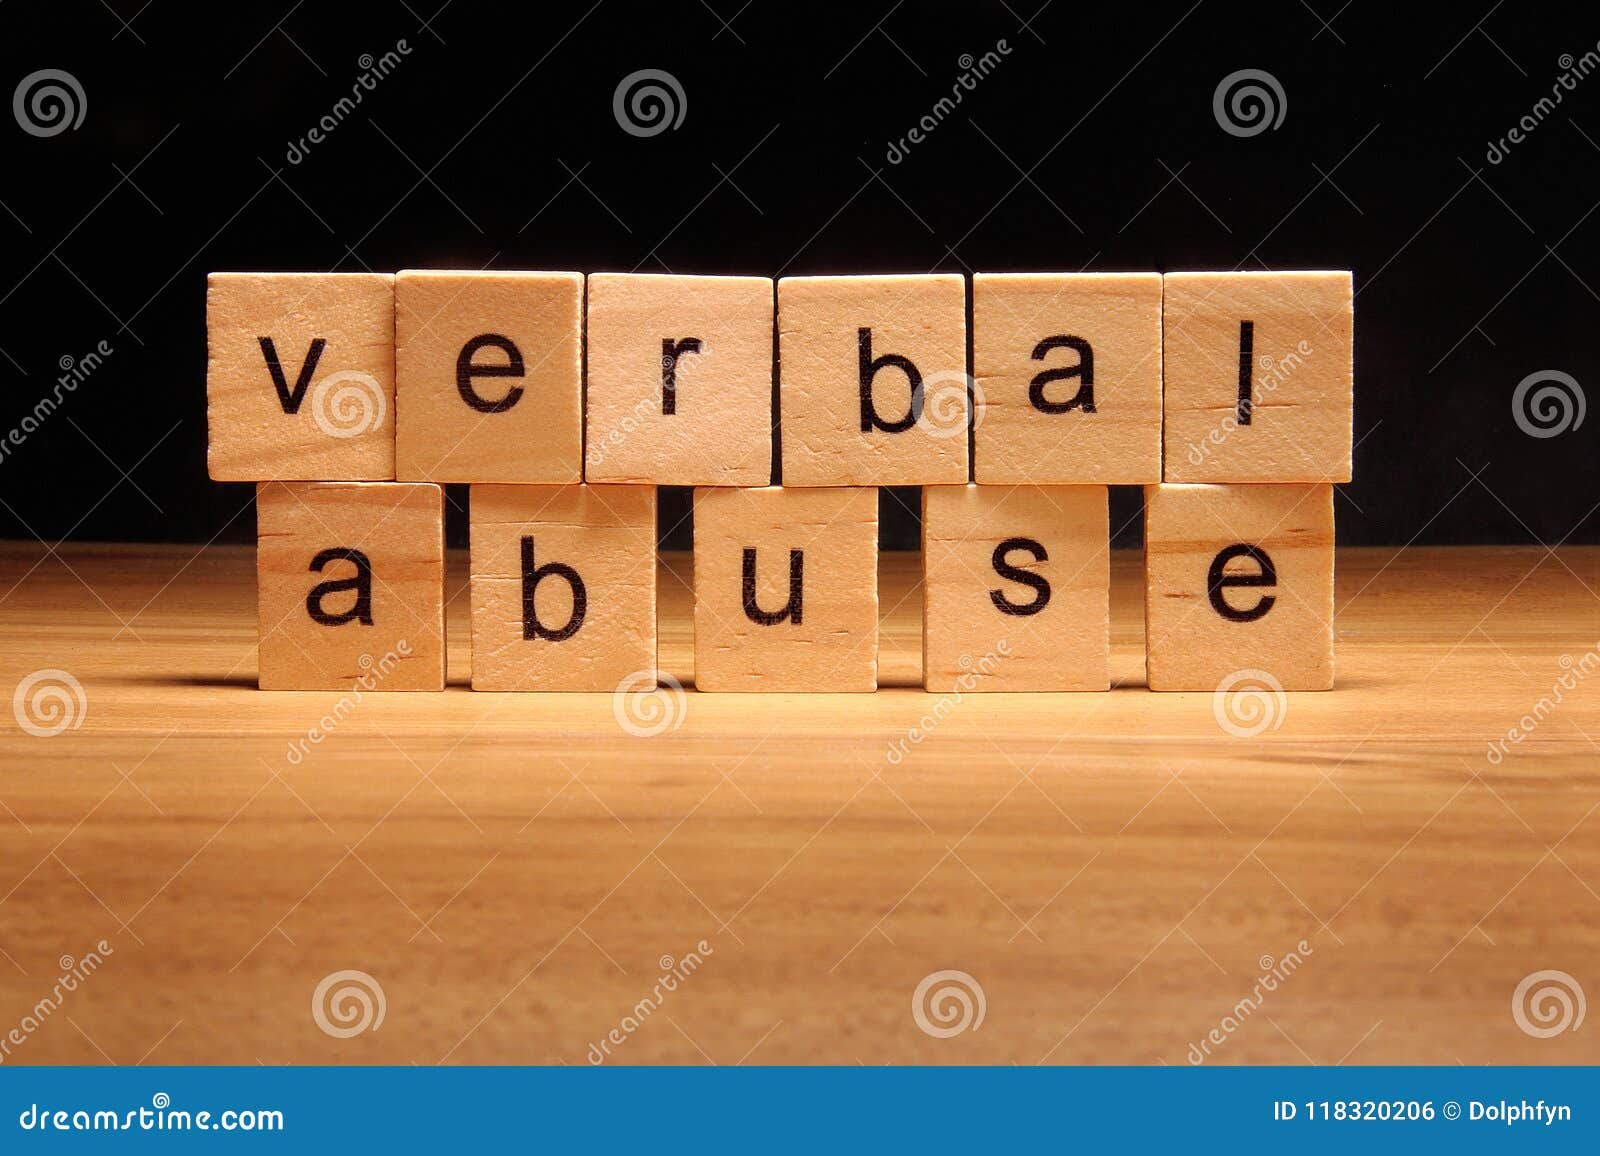 verbal abuse words written on wood cube